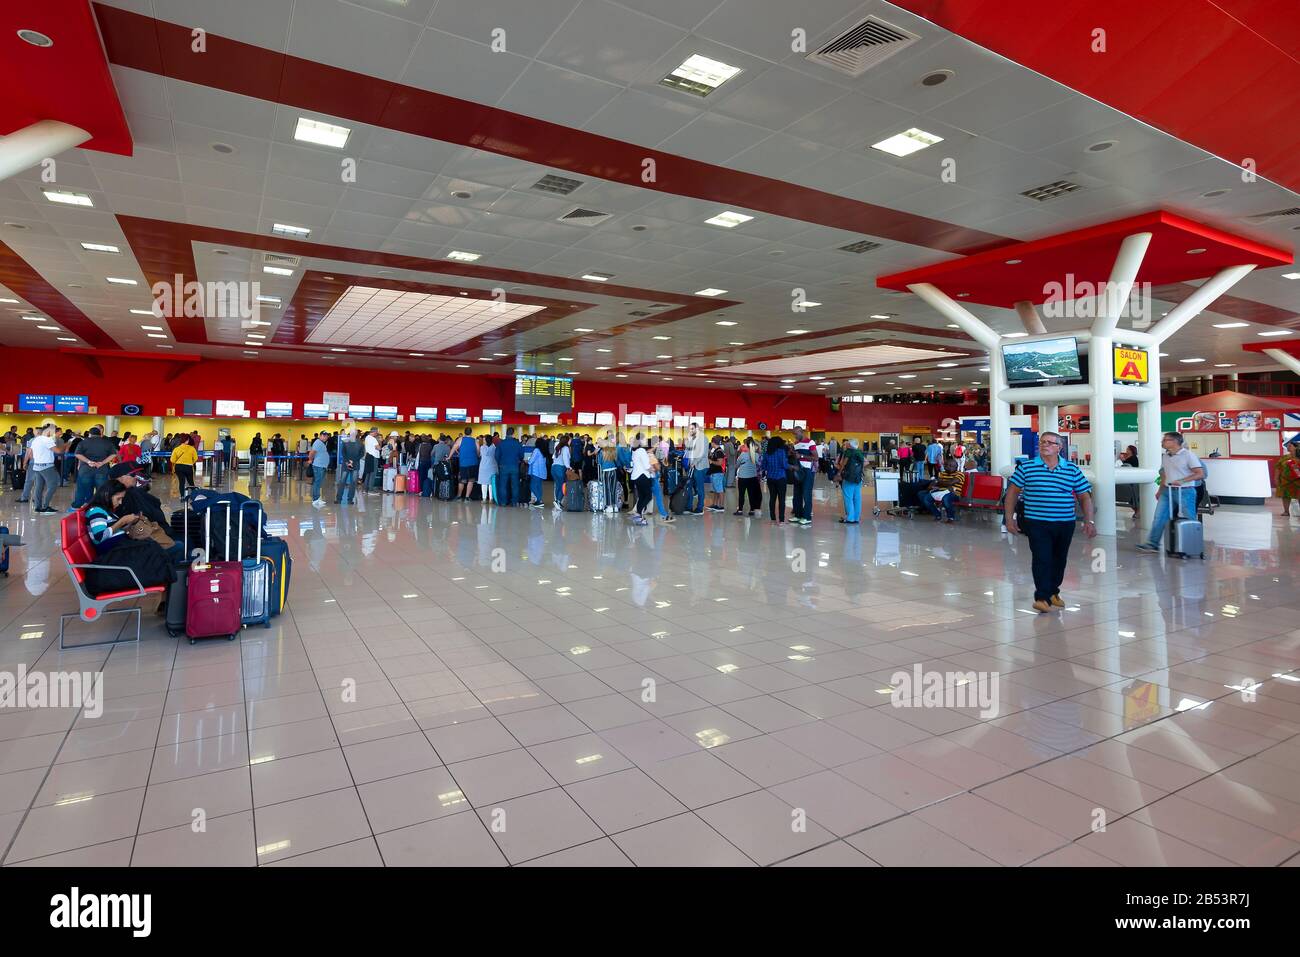 Interior of the international terminal of Jose Marti Airport serving Havana, Cuba. Check-in hall with long queues. Stock Photo